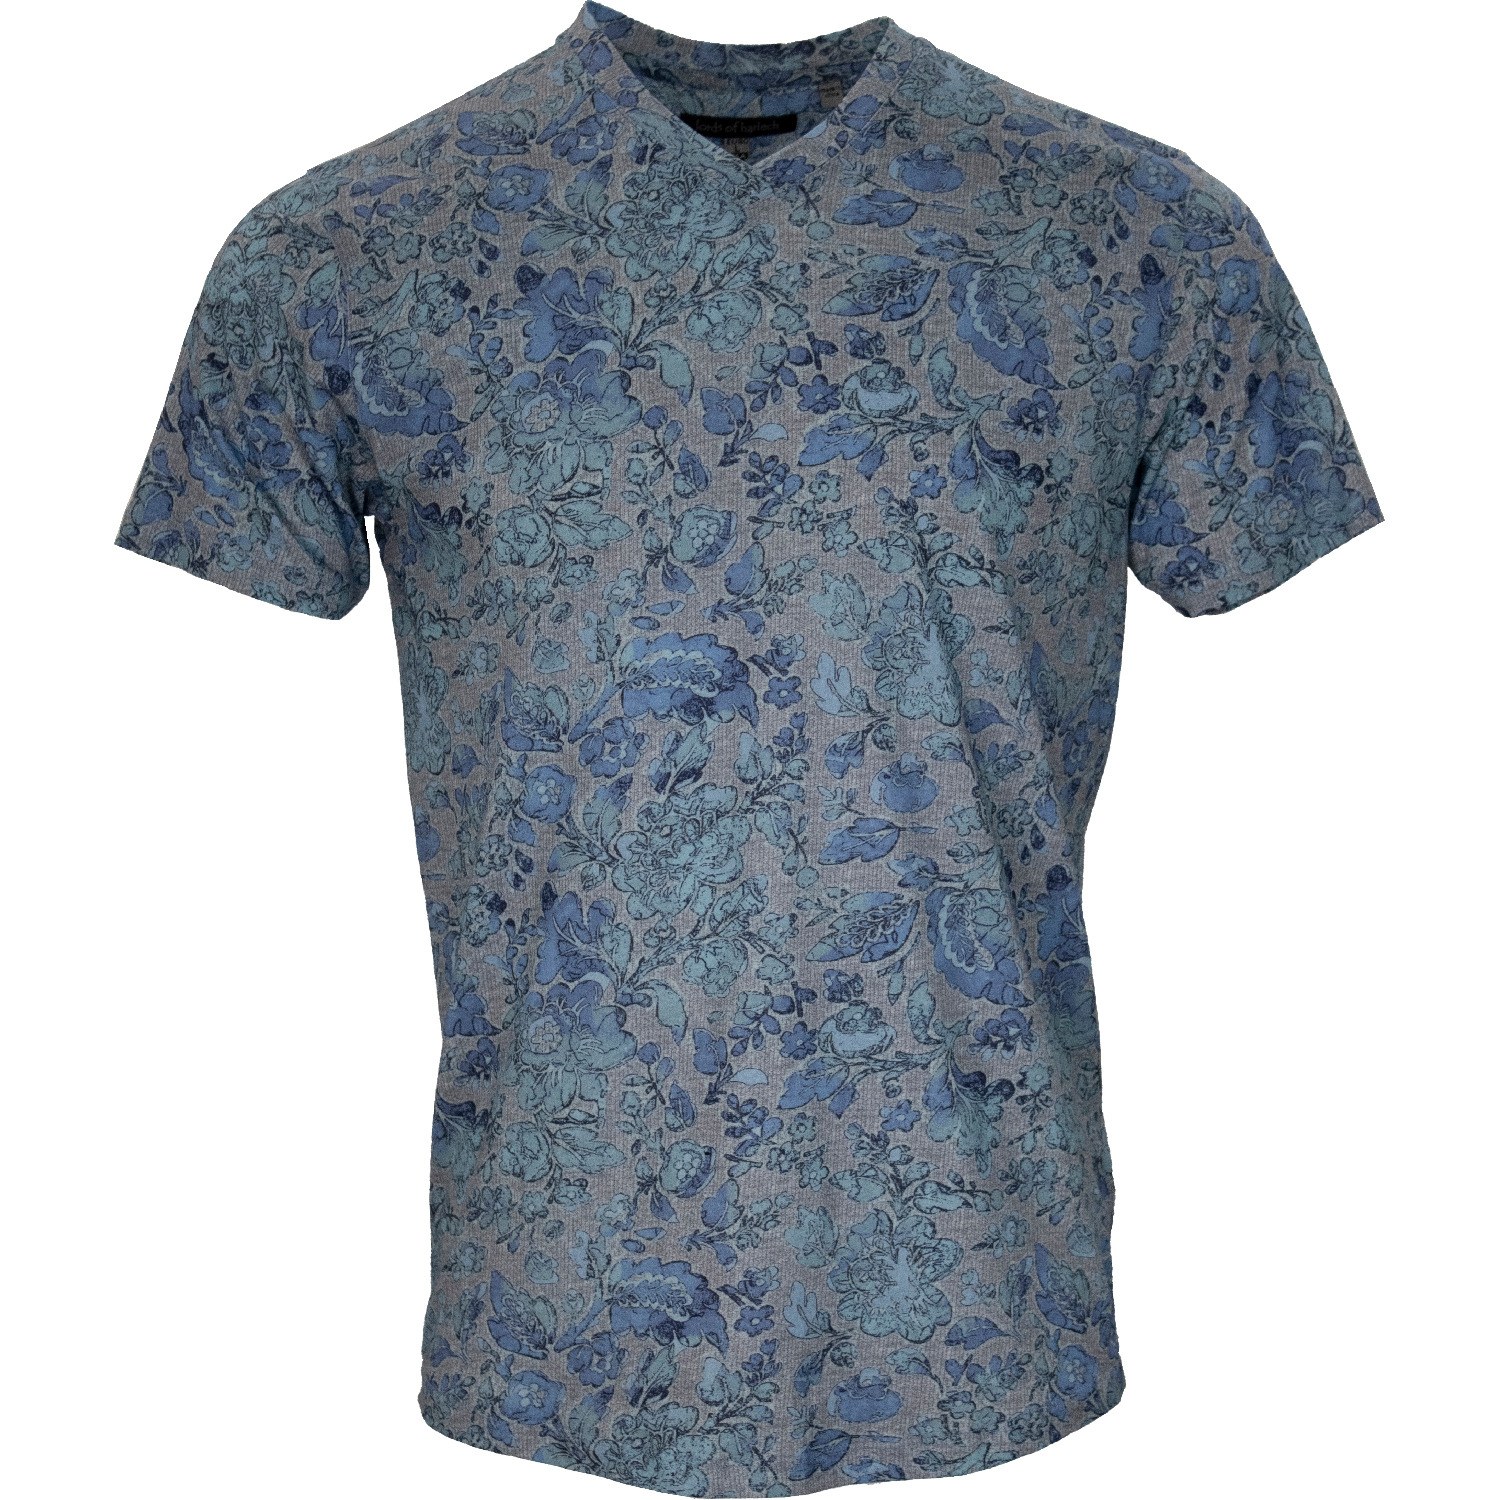 Men’s Maze York Floral Sea Large Lords of Harlech